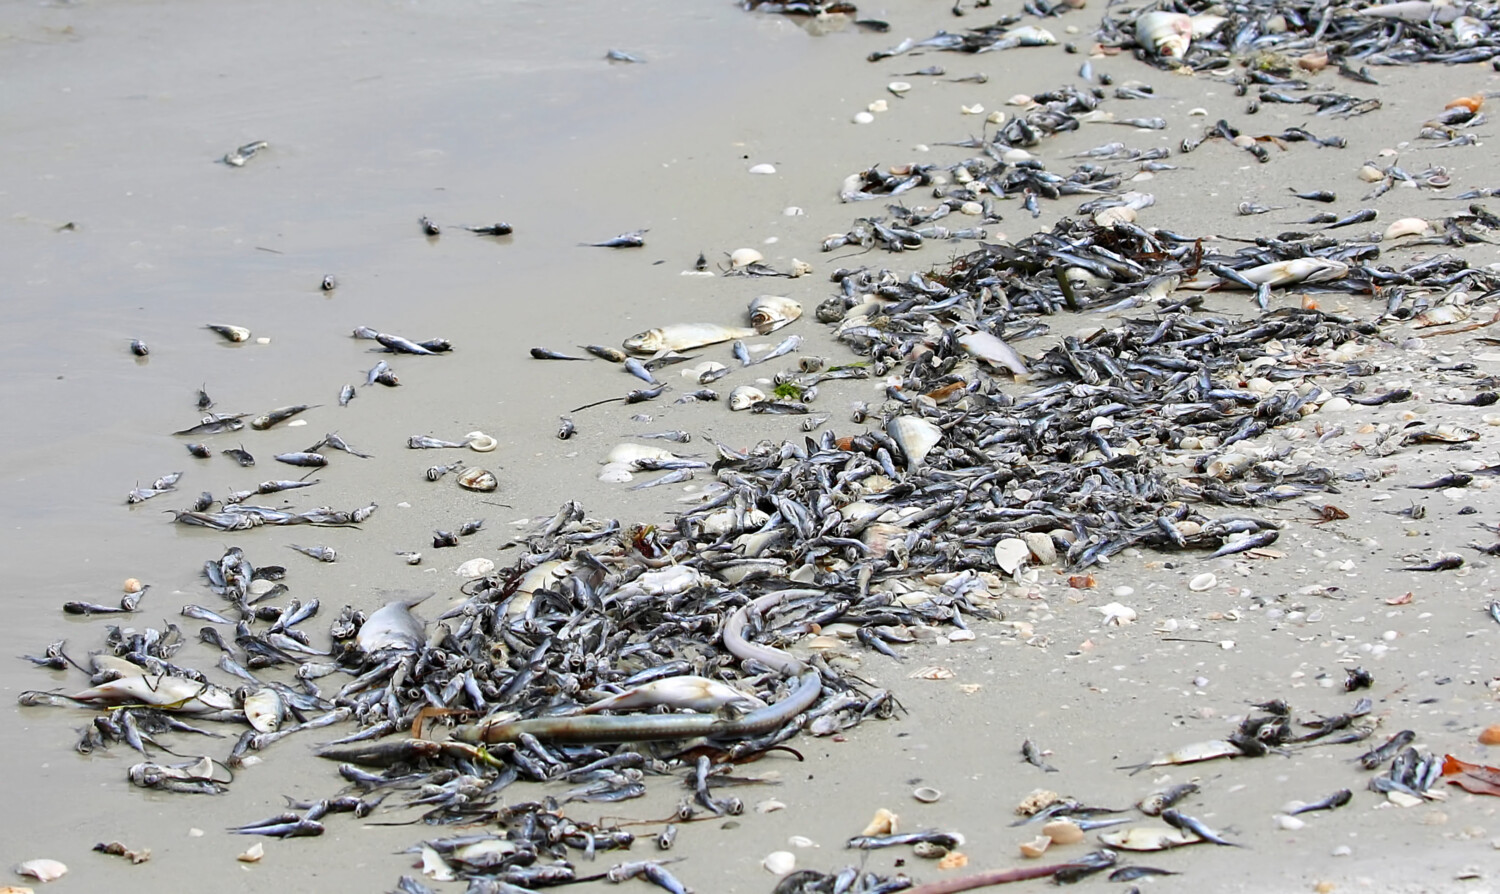 Toxic algae also known as red tide causes dead fish